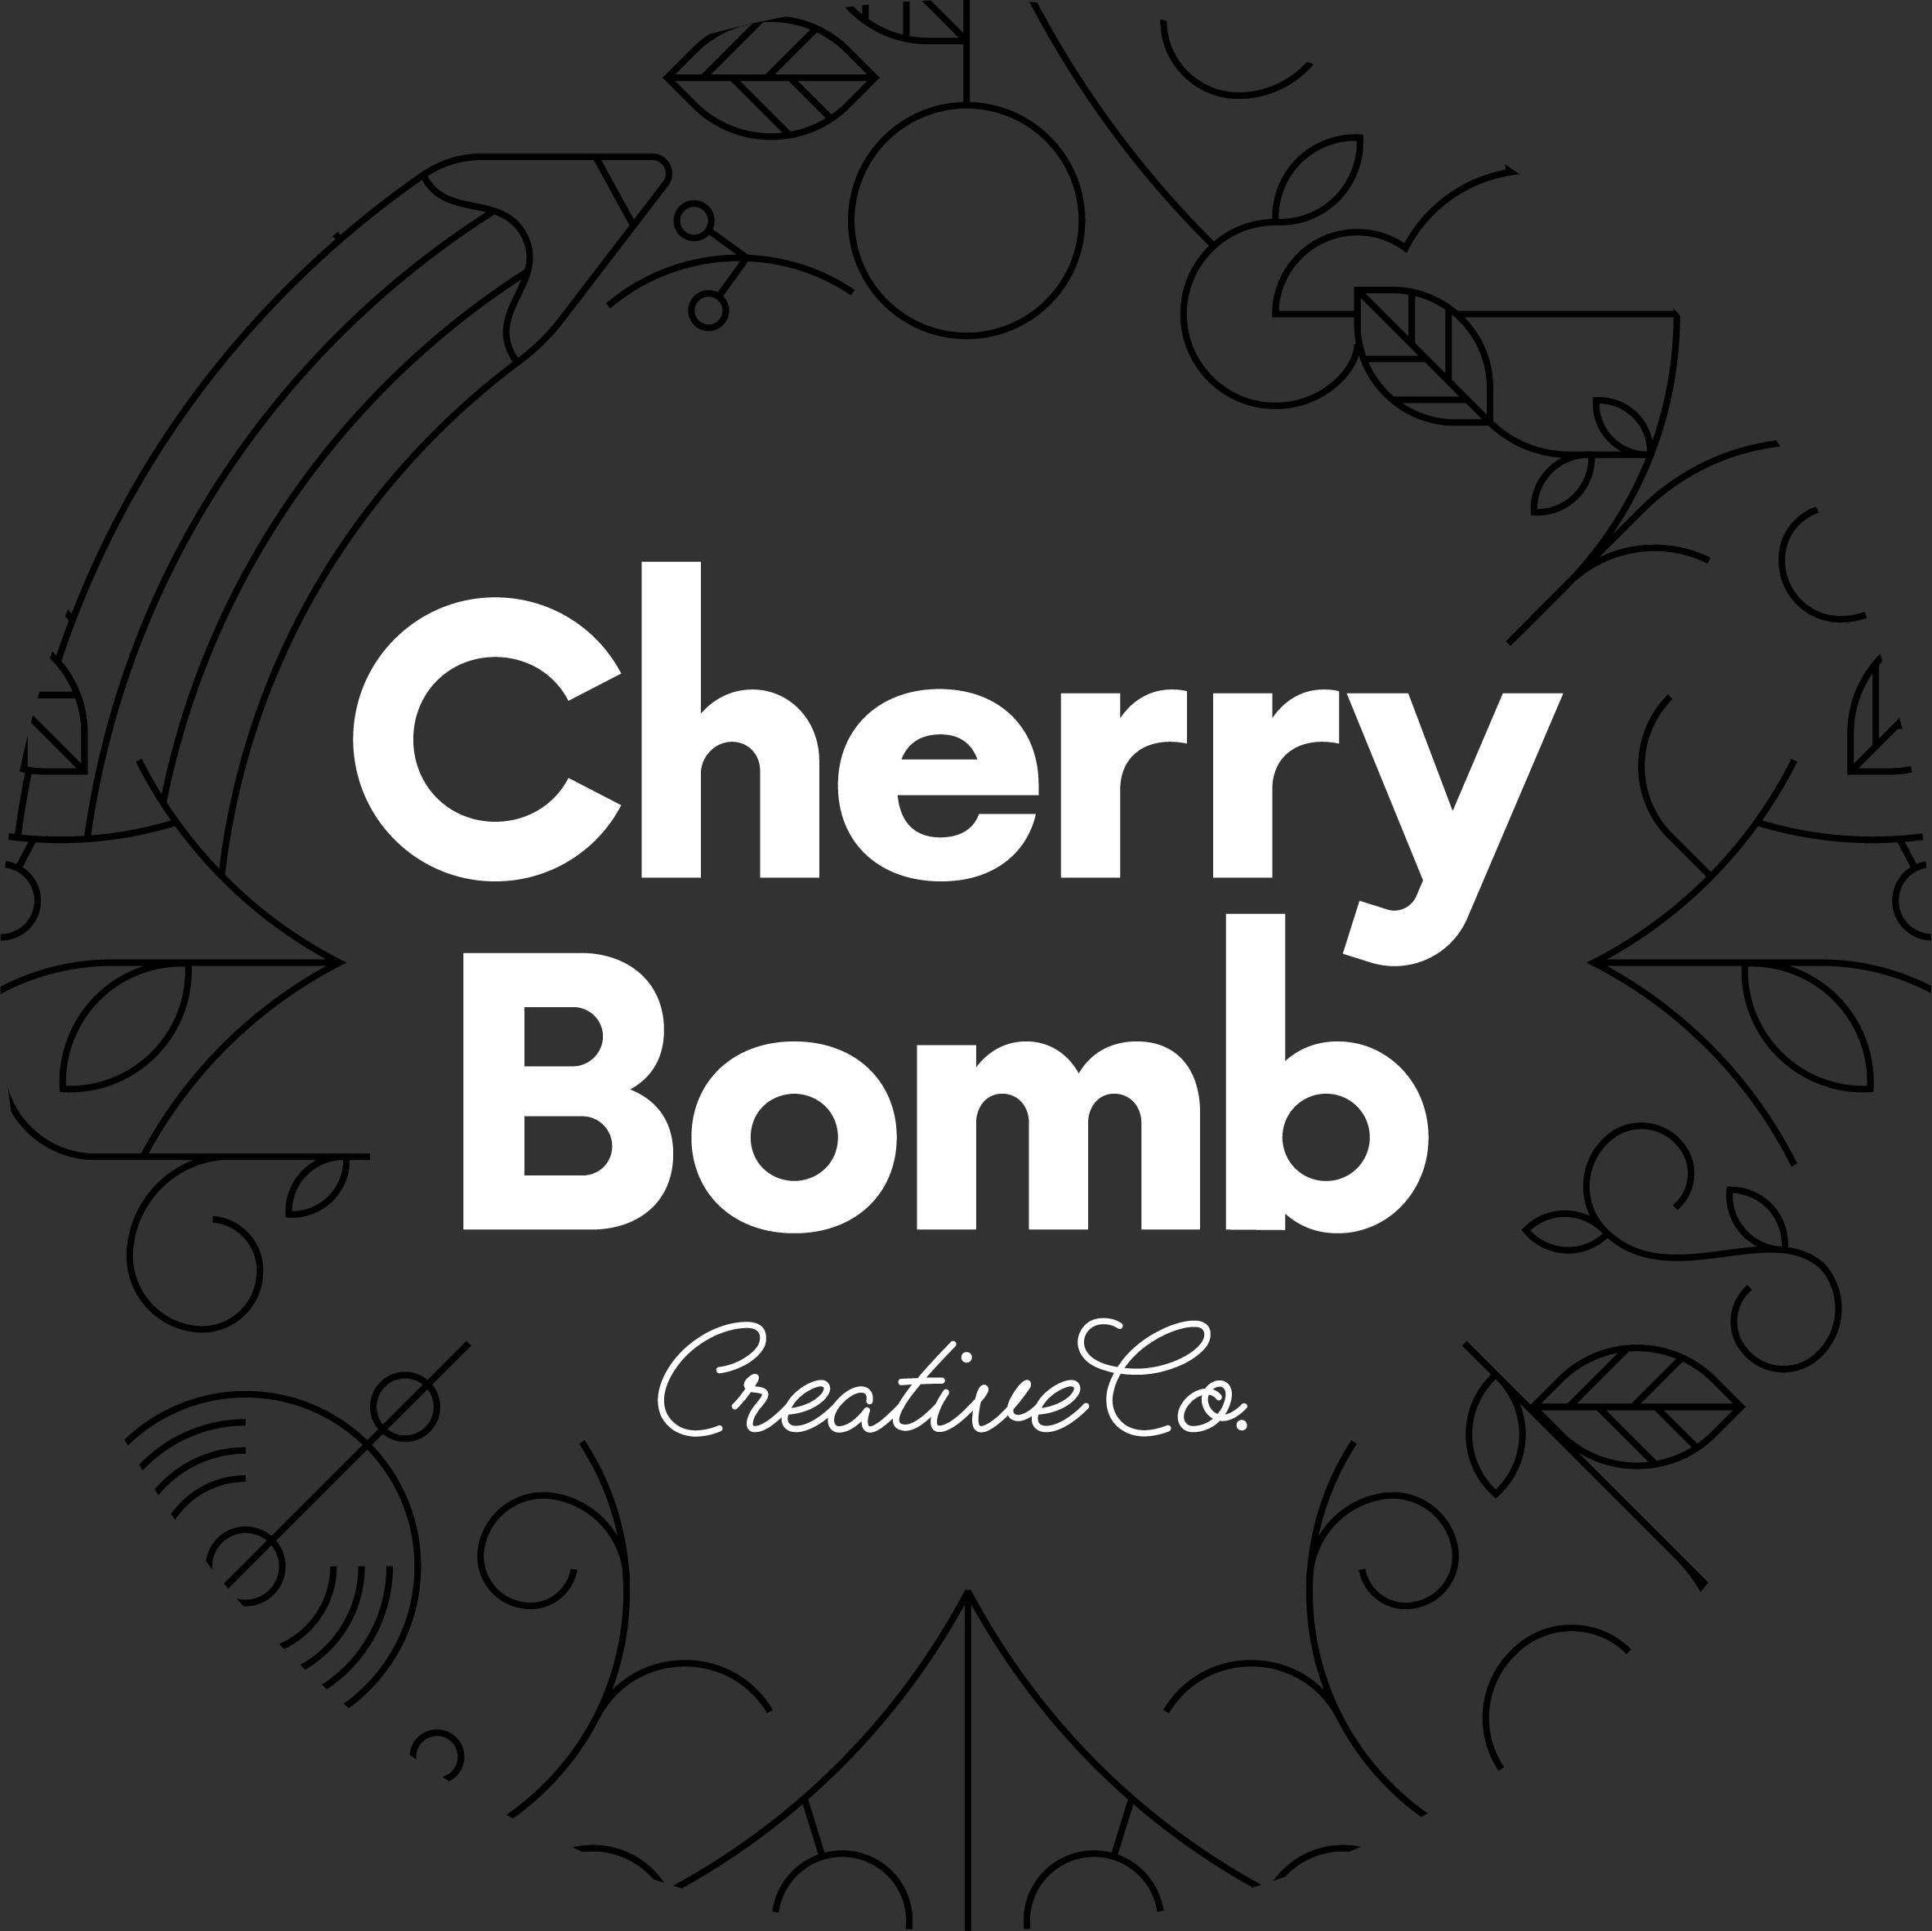 Cherry Bomb Creative Co. profile on Qualified.One